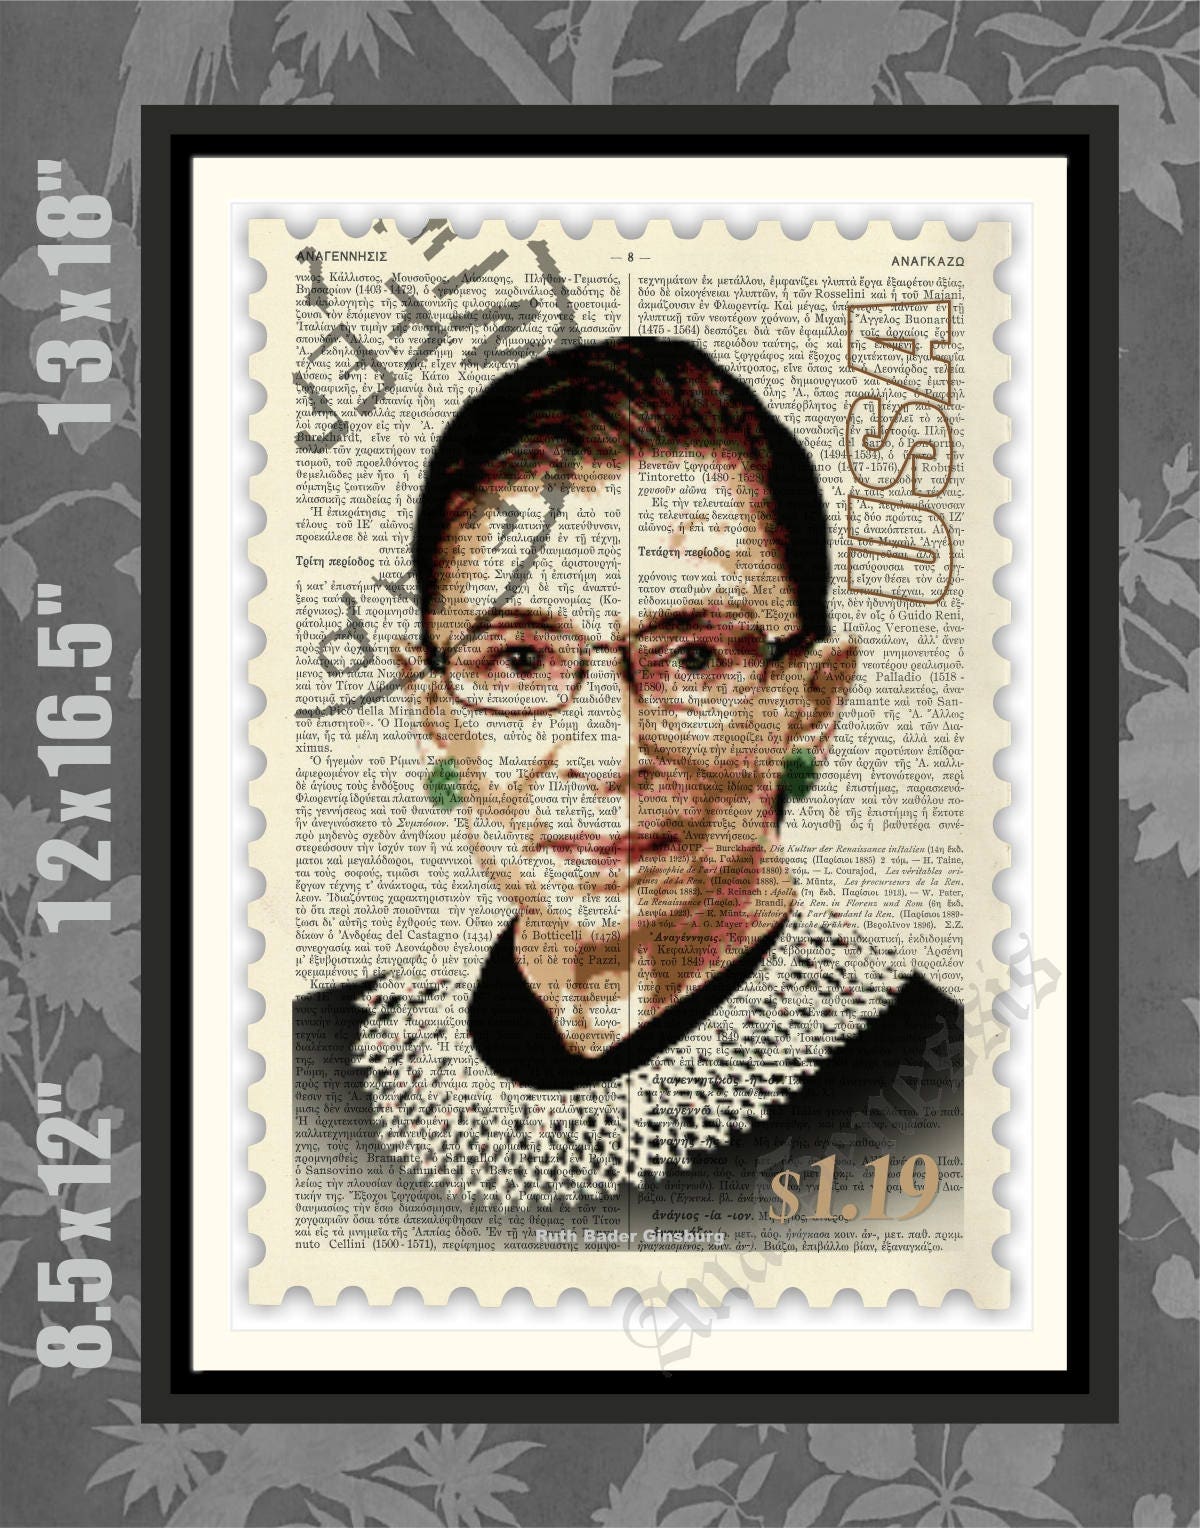 Here's the story of the portrait behind Ruth Bader Ginsburg's postage stamp